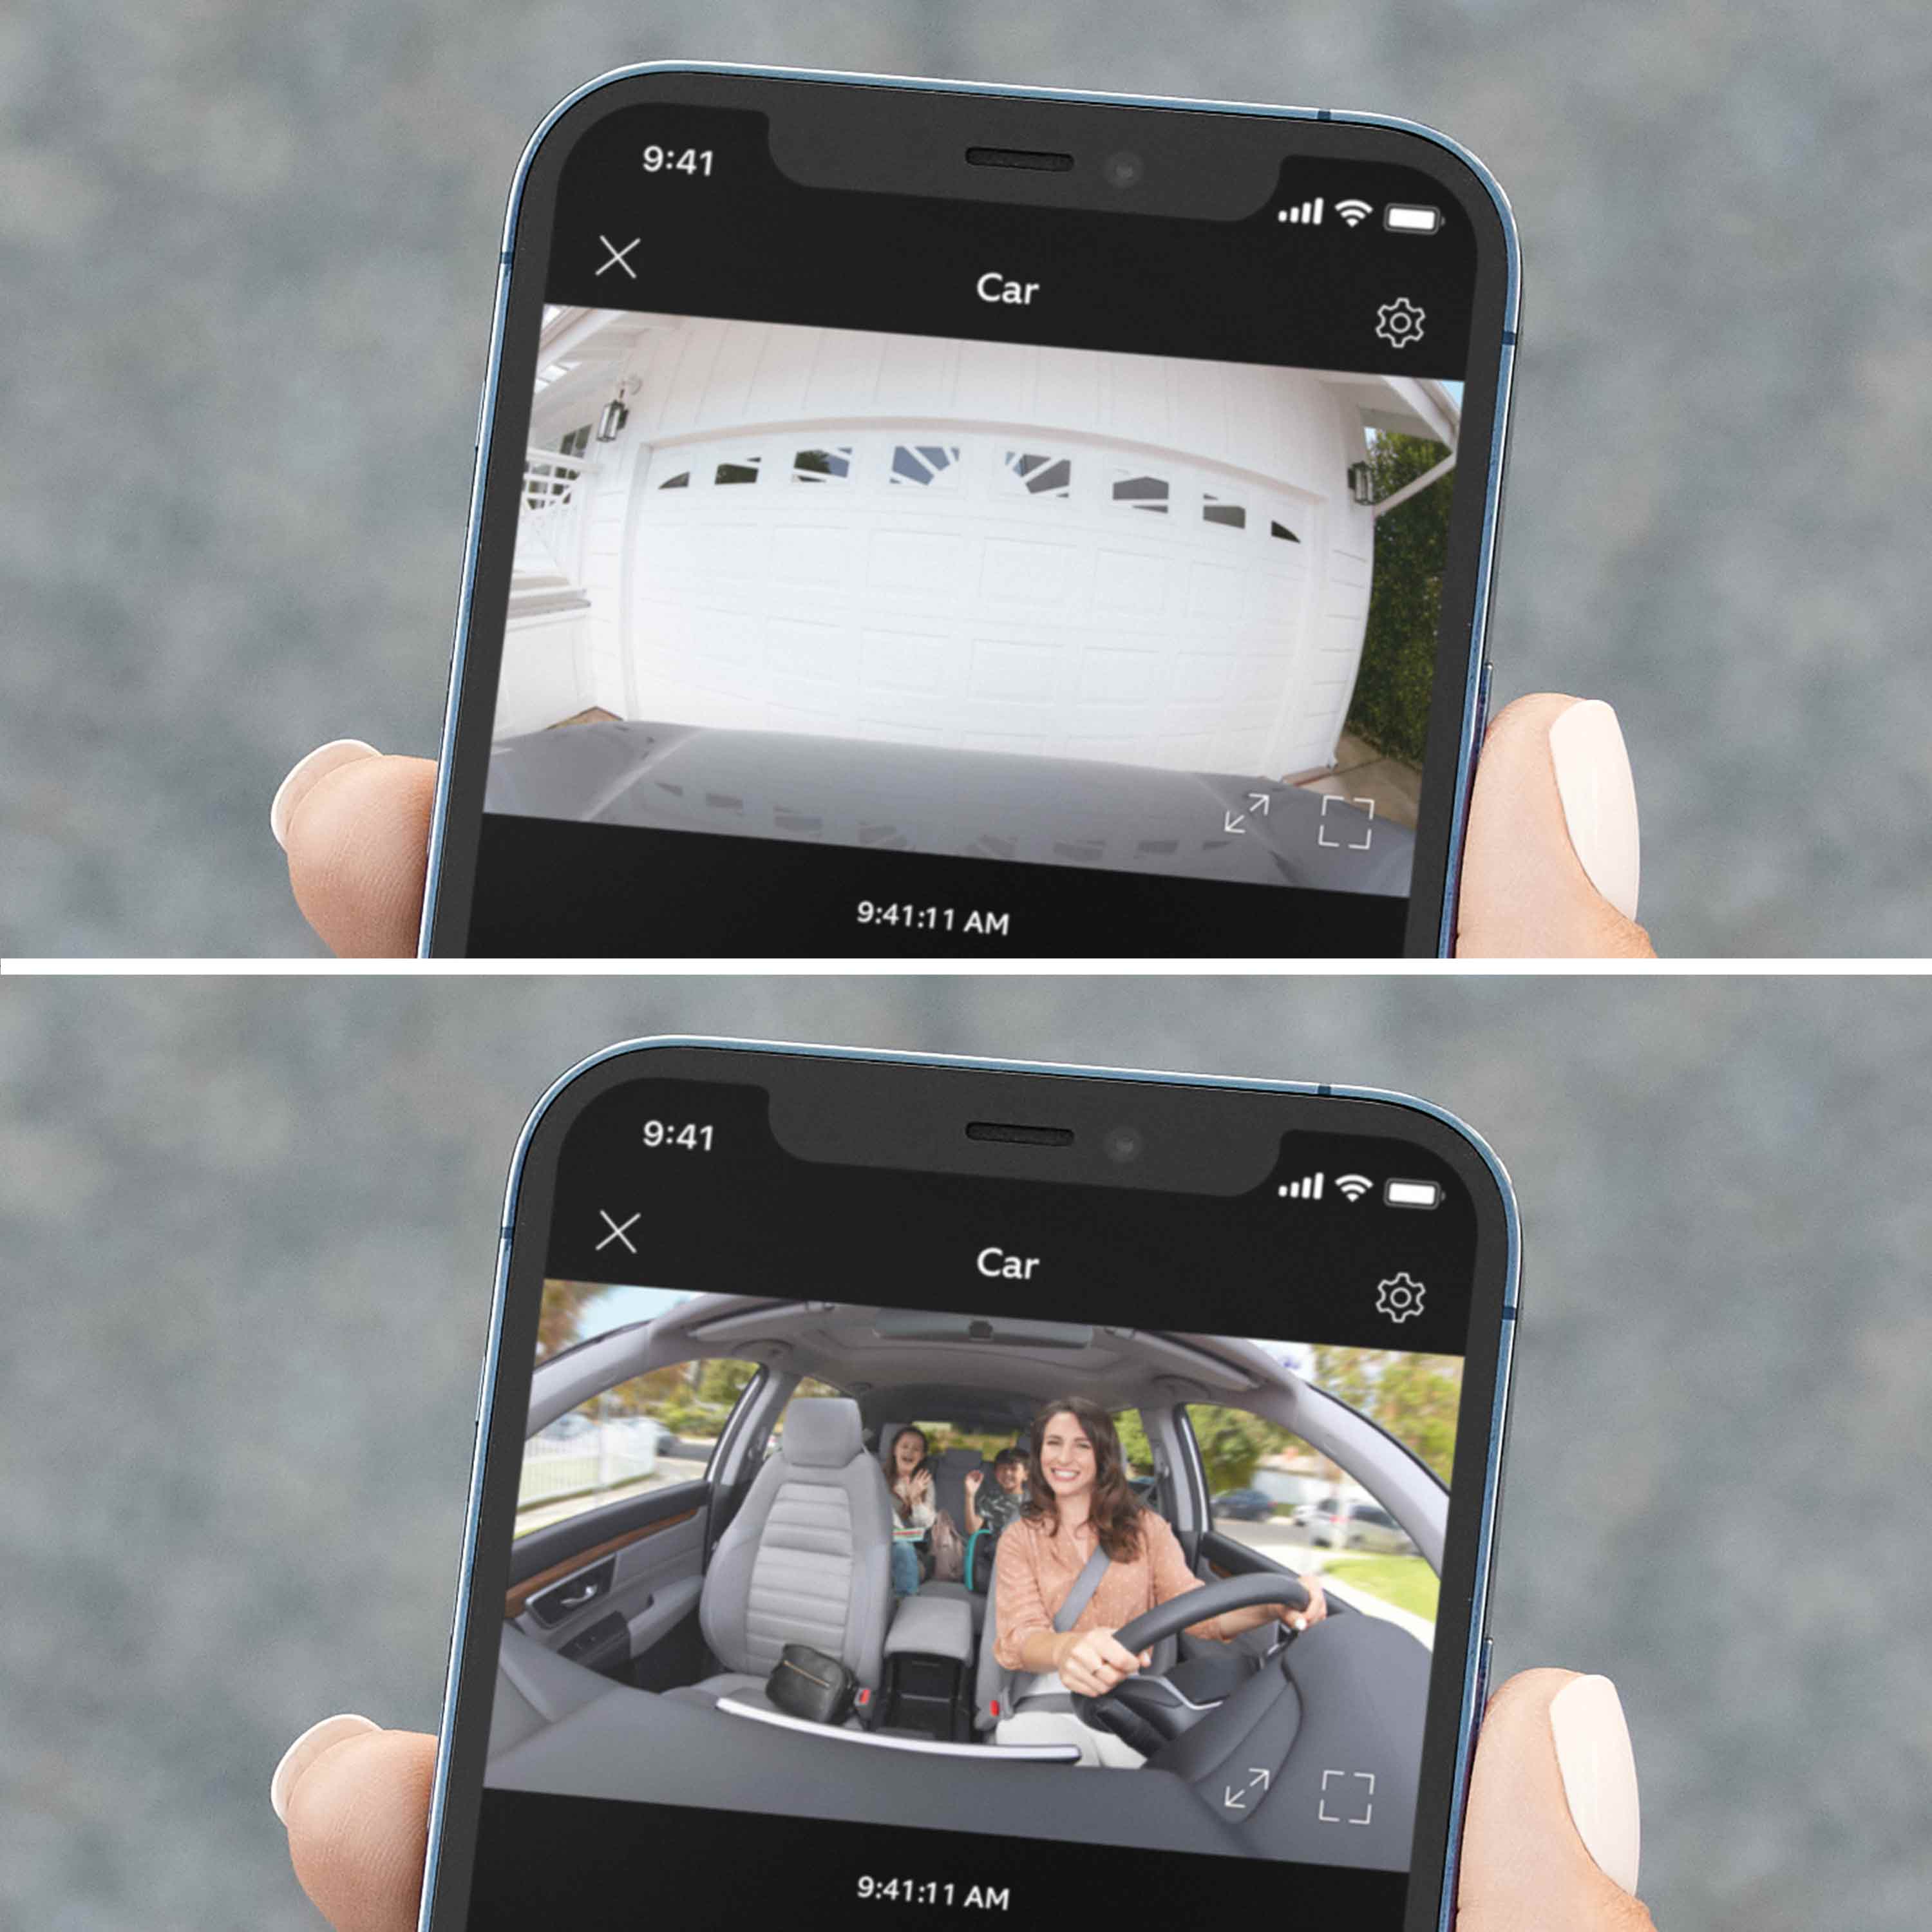 Car Cam - Smartphone showing video from Car Cam cameras. Front view of a garage door and cabin view of passengers inside car.